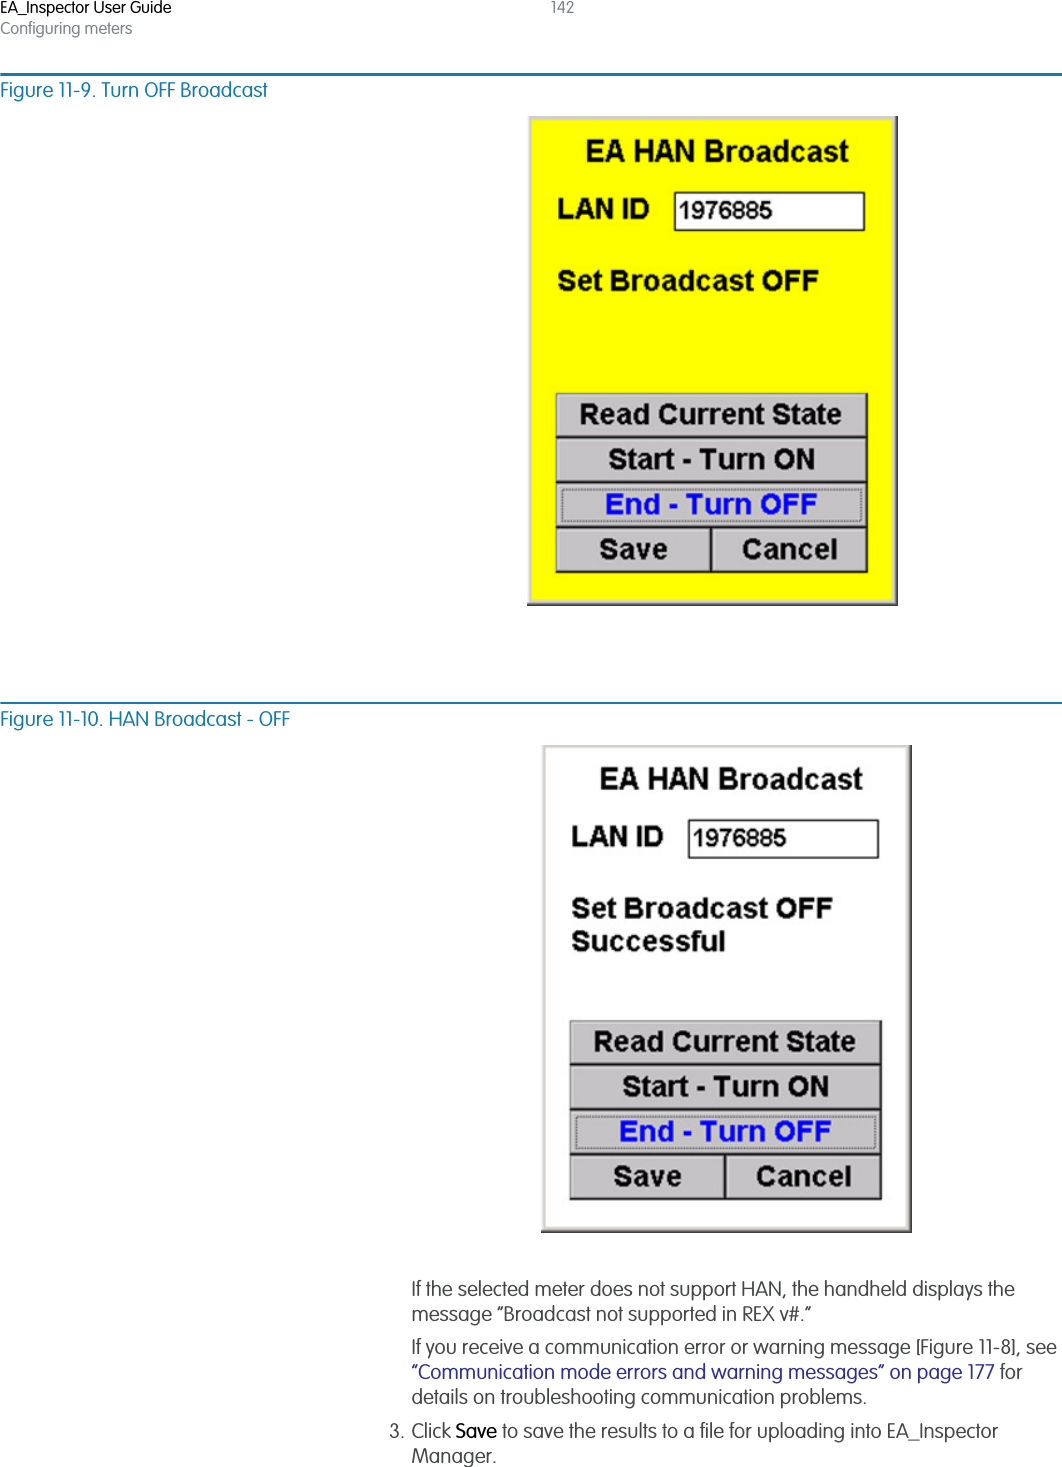 EA_Inspector User GuideConfiguring meters142Figure 11-9. Turn OFF BroadcastFigure 11-10. HAN Broadcast - OFFIf the selected meter does not support HAN, the handheld displays the message “Broadcast not supported in REX v#.”If you receive a communication error or warning message [Figure 11-8], see “Communication mode errors and warning messages” on page 177 for details on troubleshooting communication problems.3. Click Save to save the results to a file for uploading into EA_Inspector Manager.